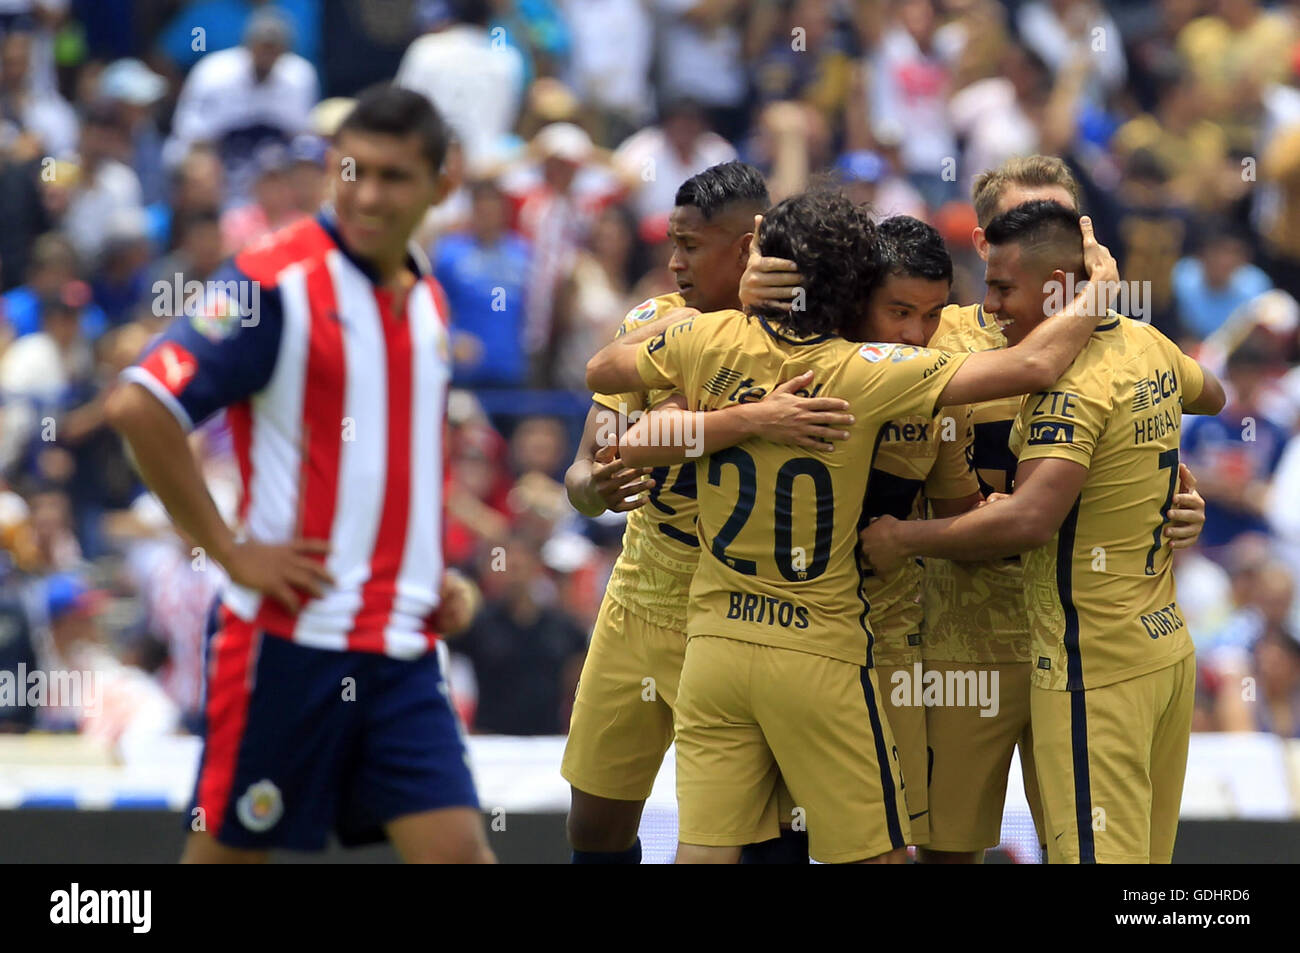 Mexico City, Mexico. 17th July, 2016. Players of UNAM Pumas celebrate the  own goal of Guadalajara Chivas's Jair Pereira Rodriguez during their Mexico  Primera Division Apertura match at the Olympic University Stadium